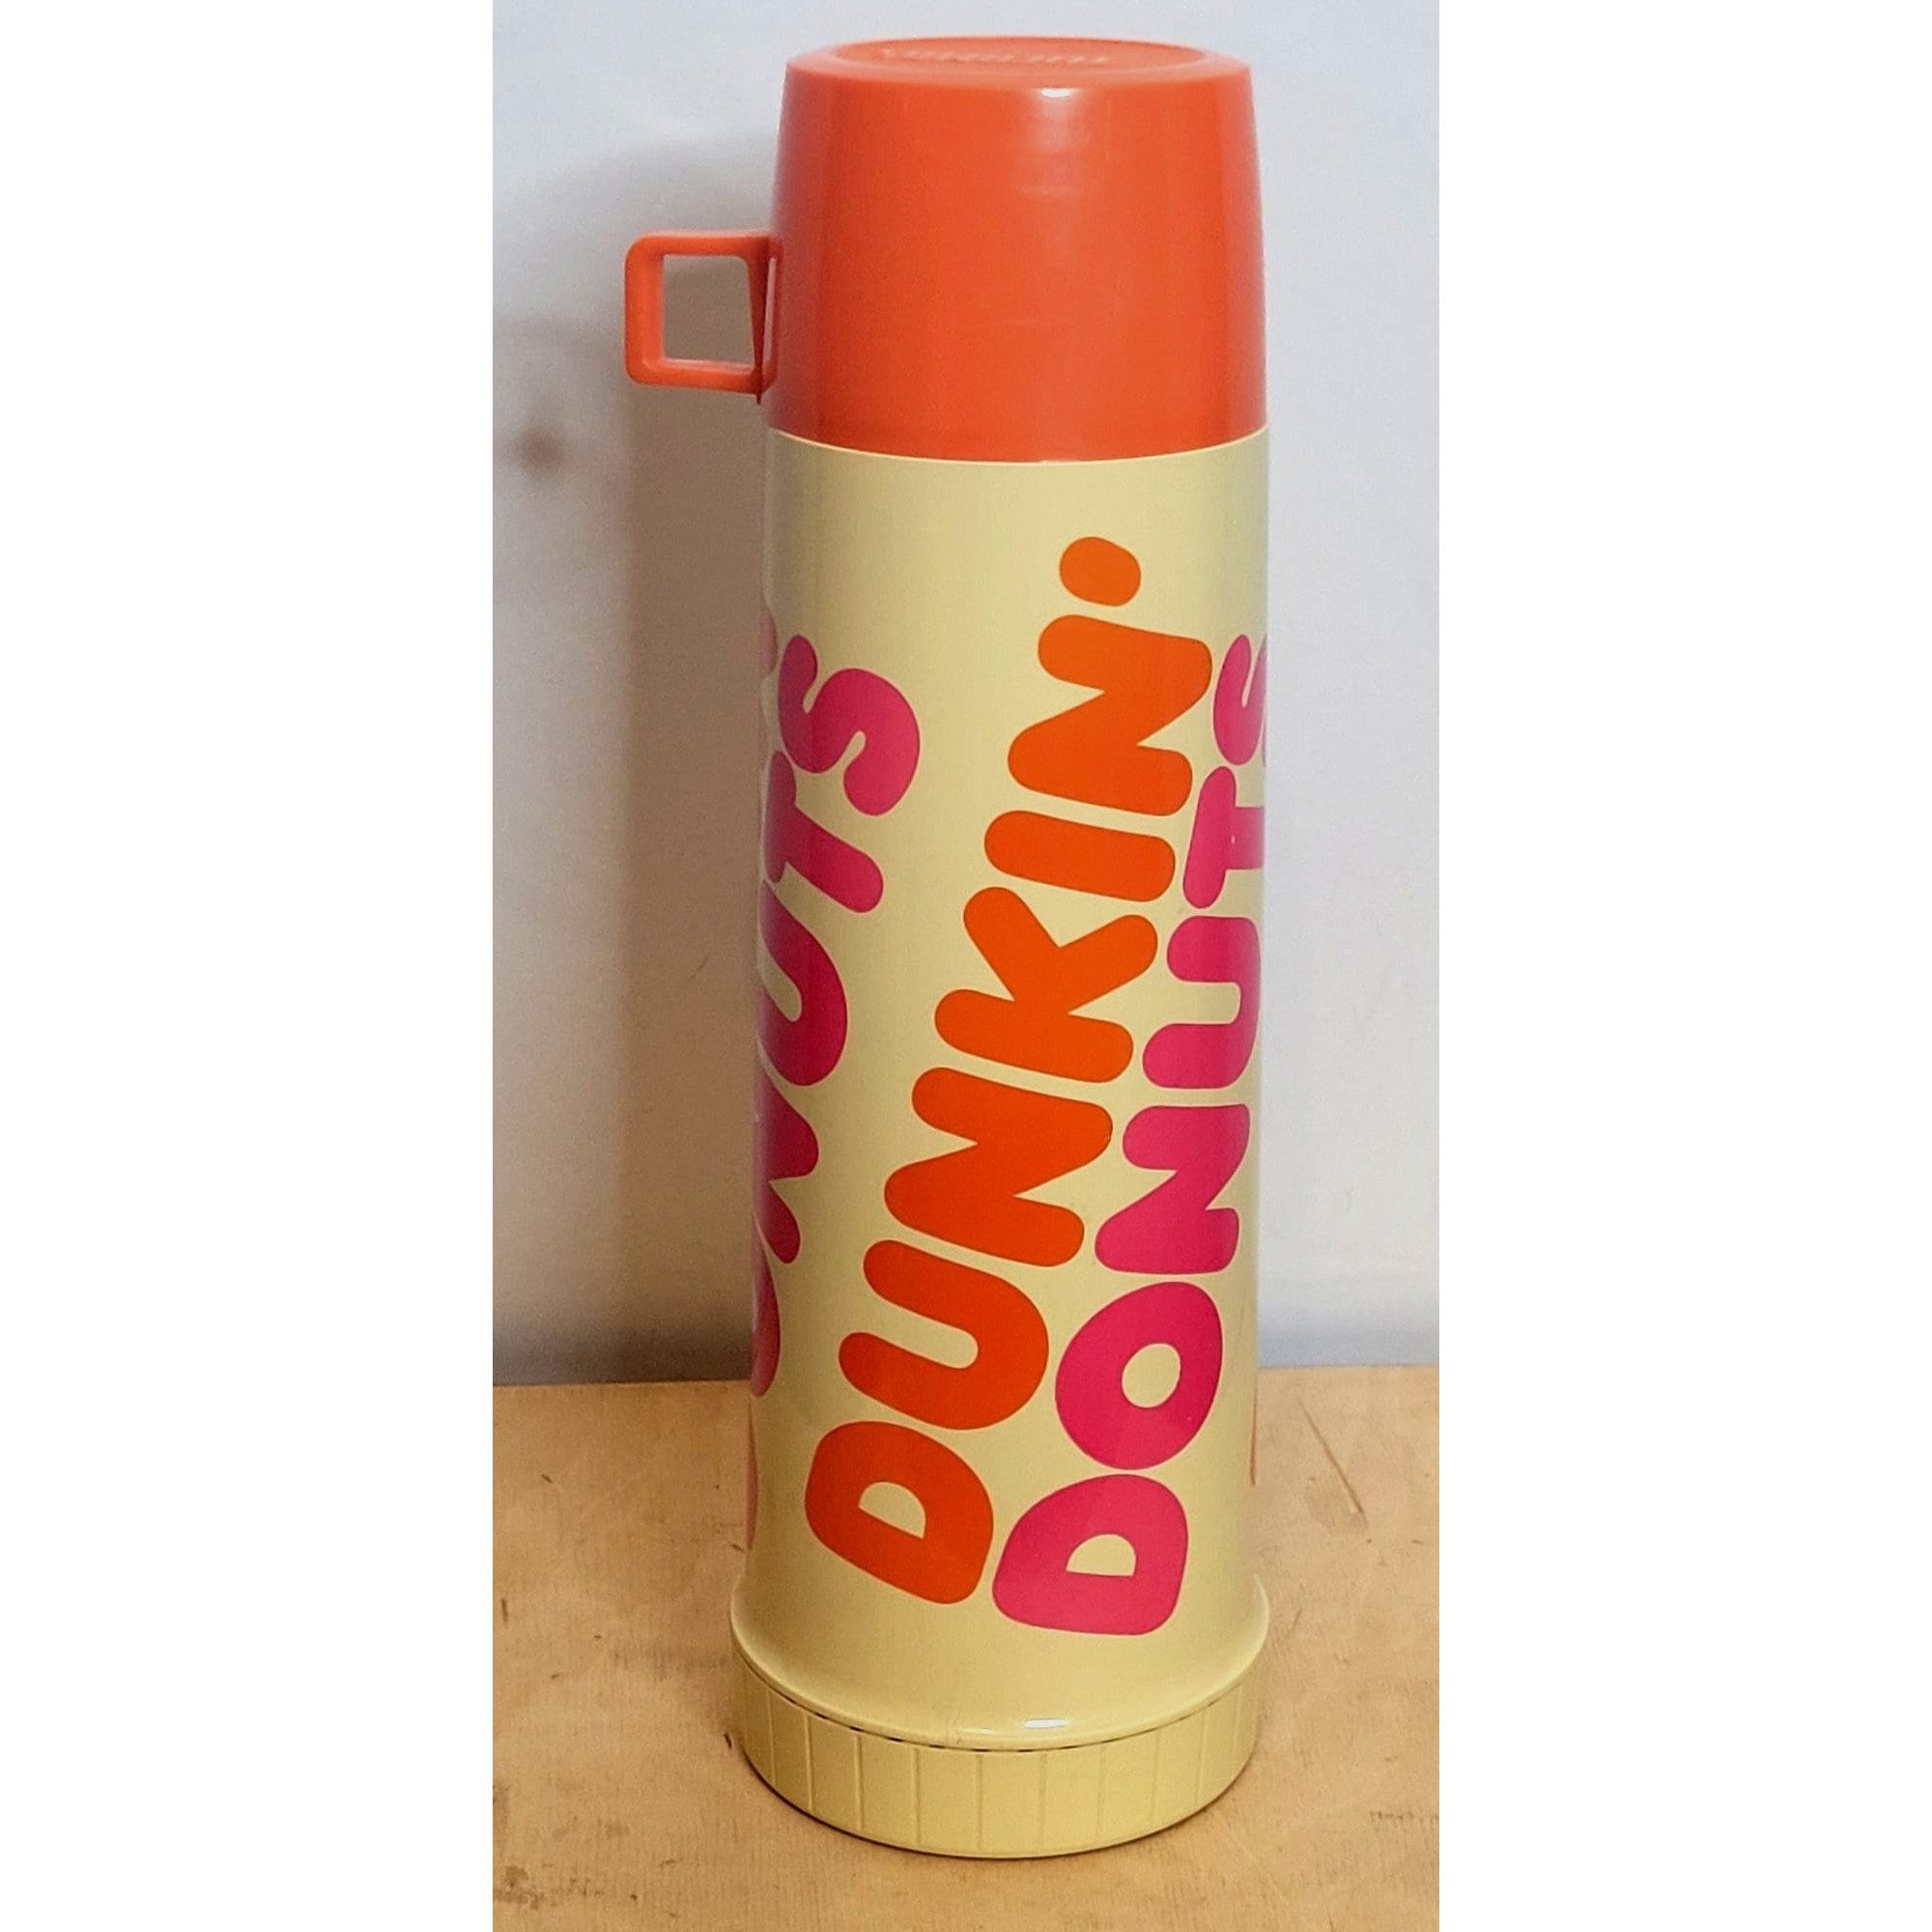 Vintage DUNKIN DONUTS Metal King Seeley Thermos Hot & Cold Cooler Coffee 